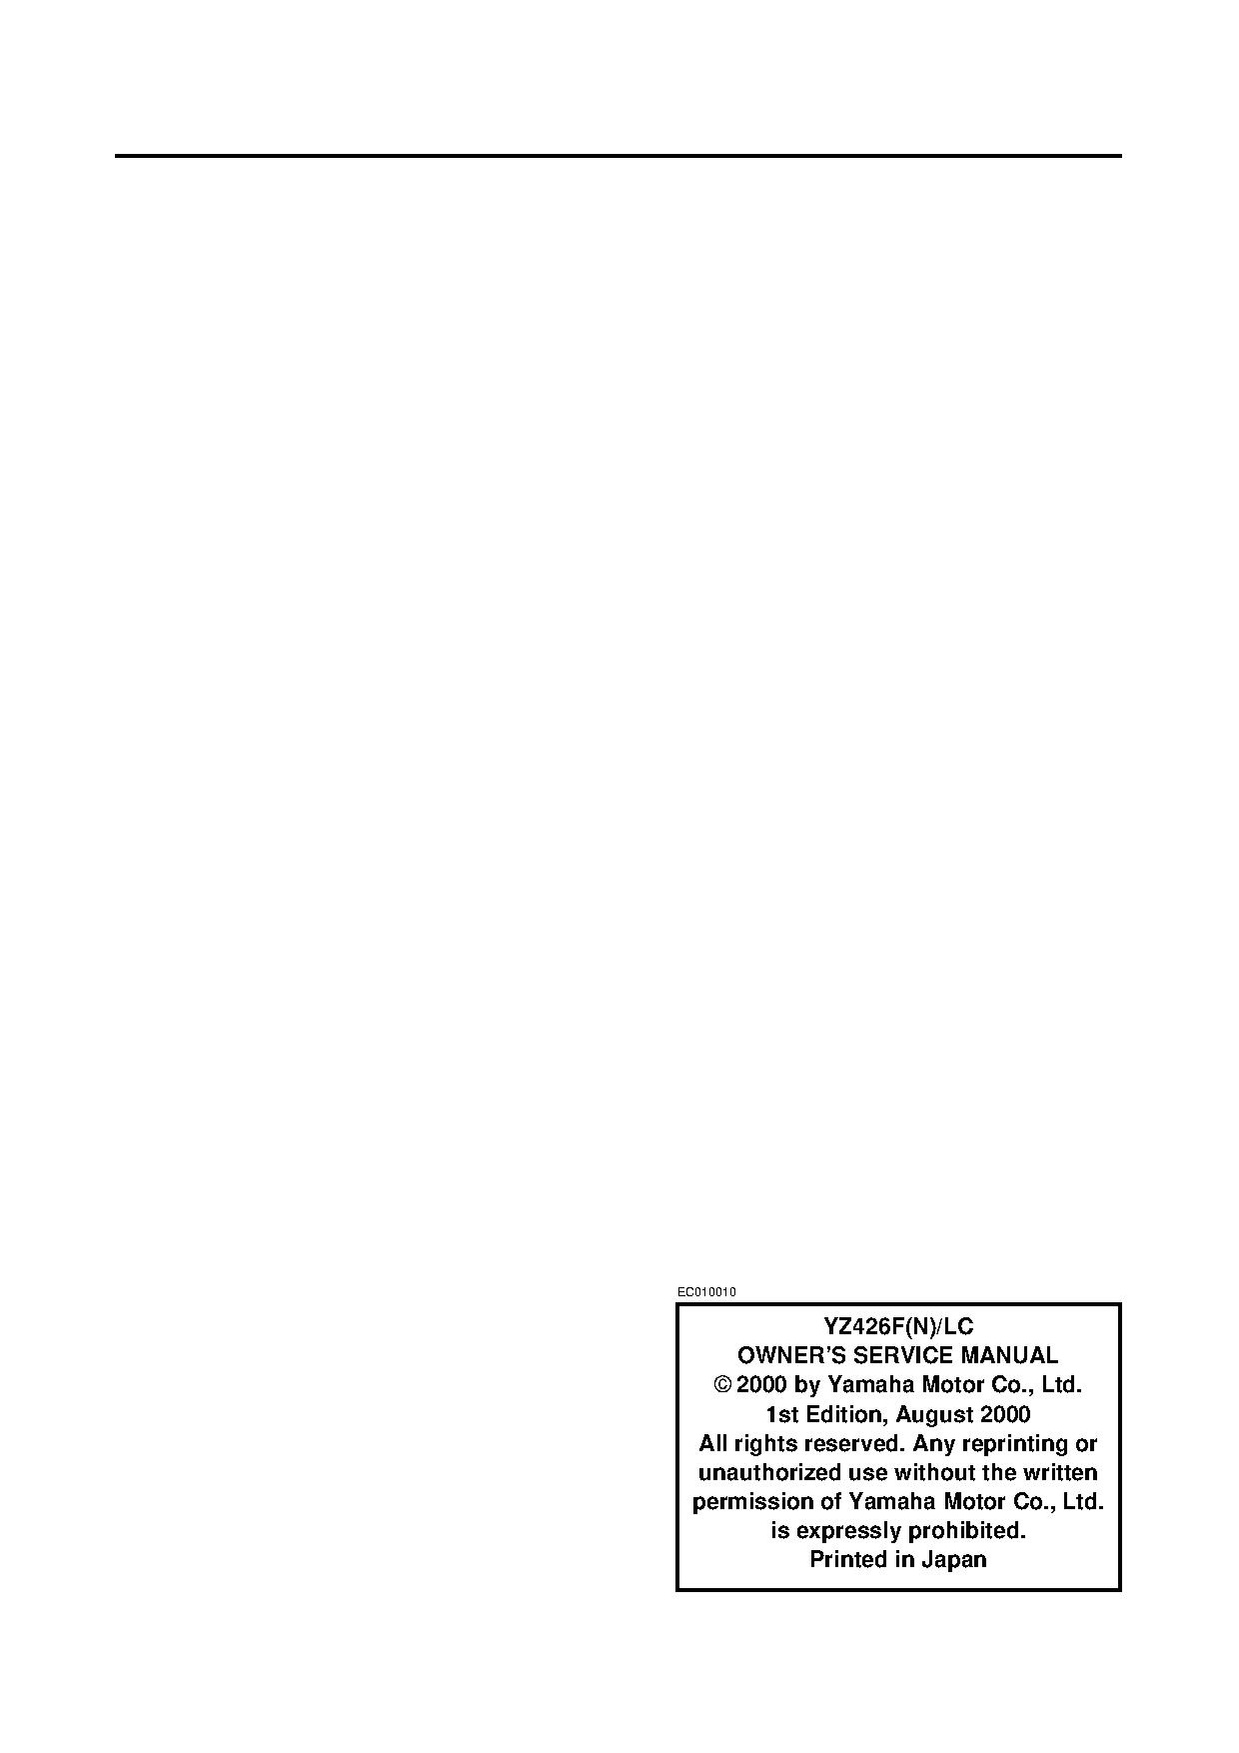 File:2001 Yamaha YZ426F (N) LC Owners Service Manual.pdf